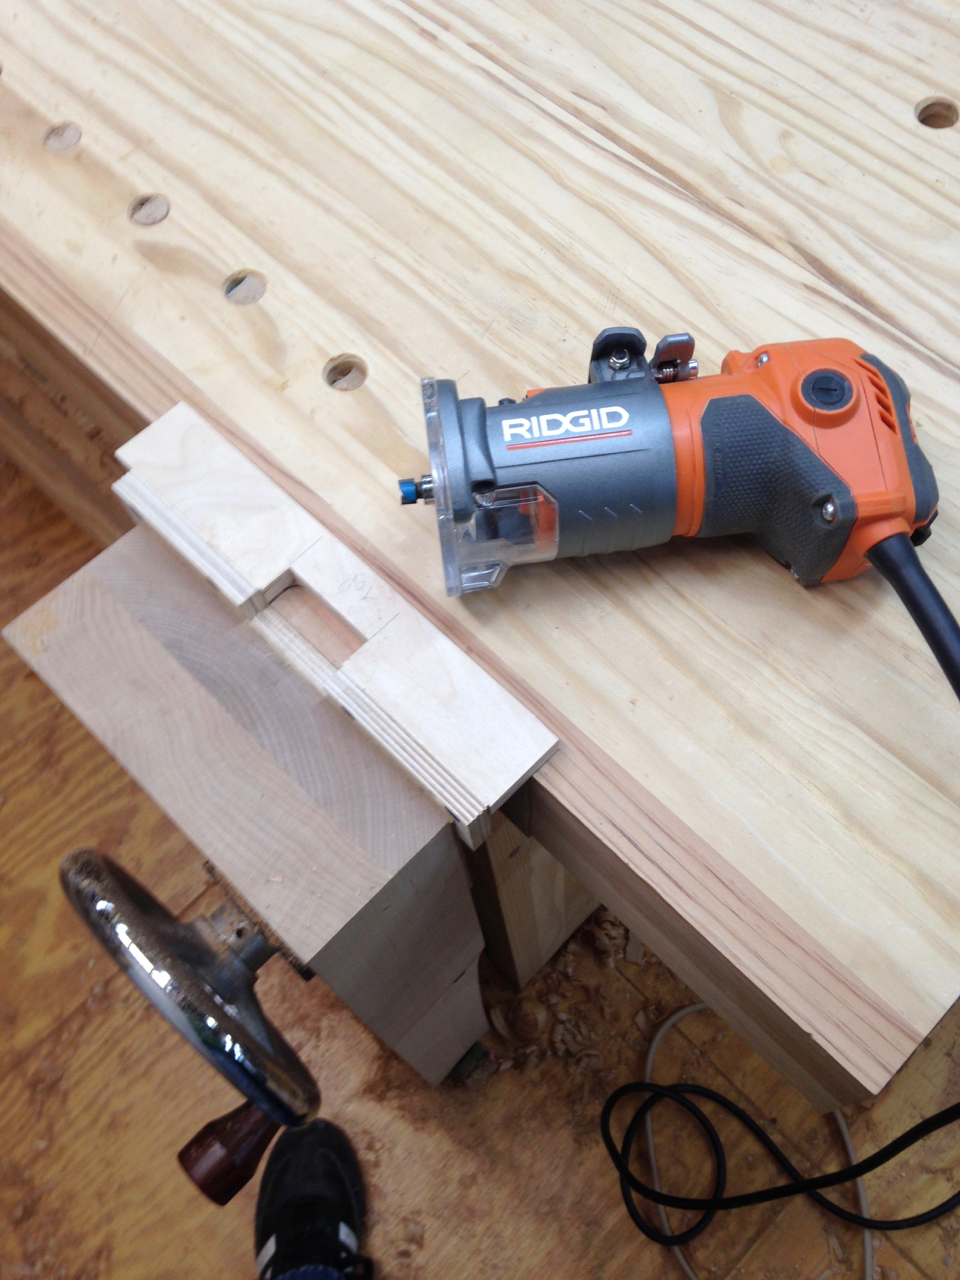 jig and router